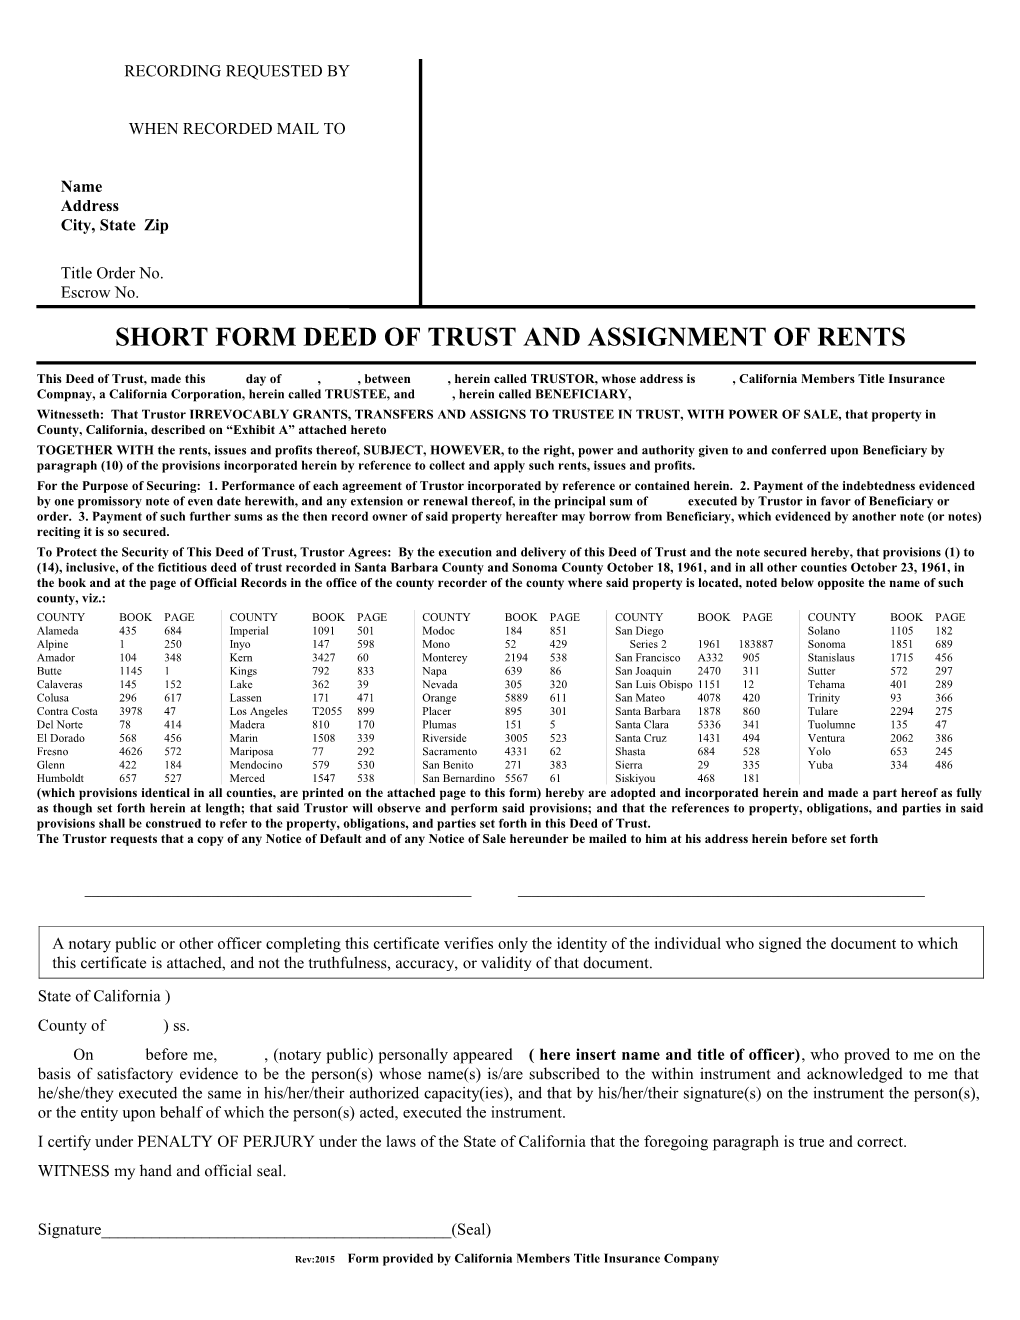 Short Form Deed of Trust and Assignment of Rents